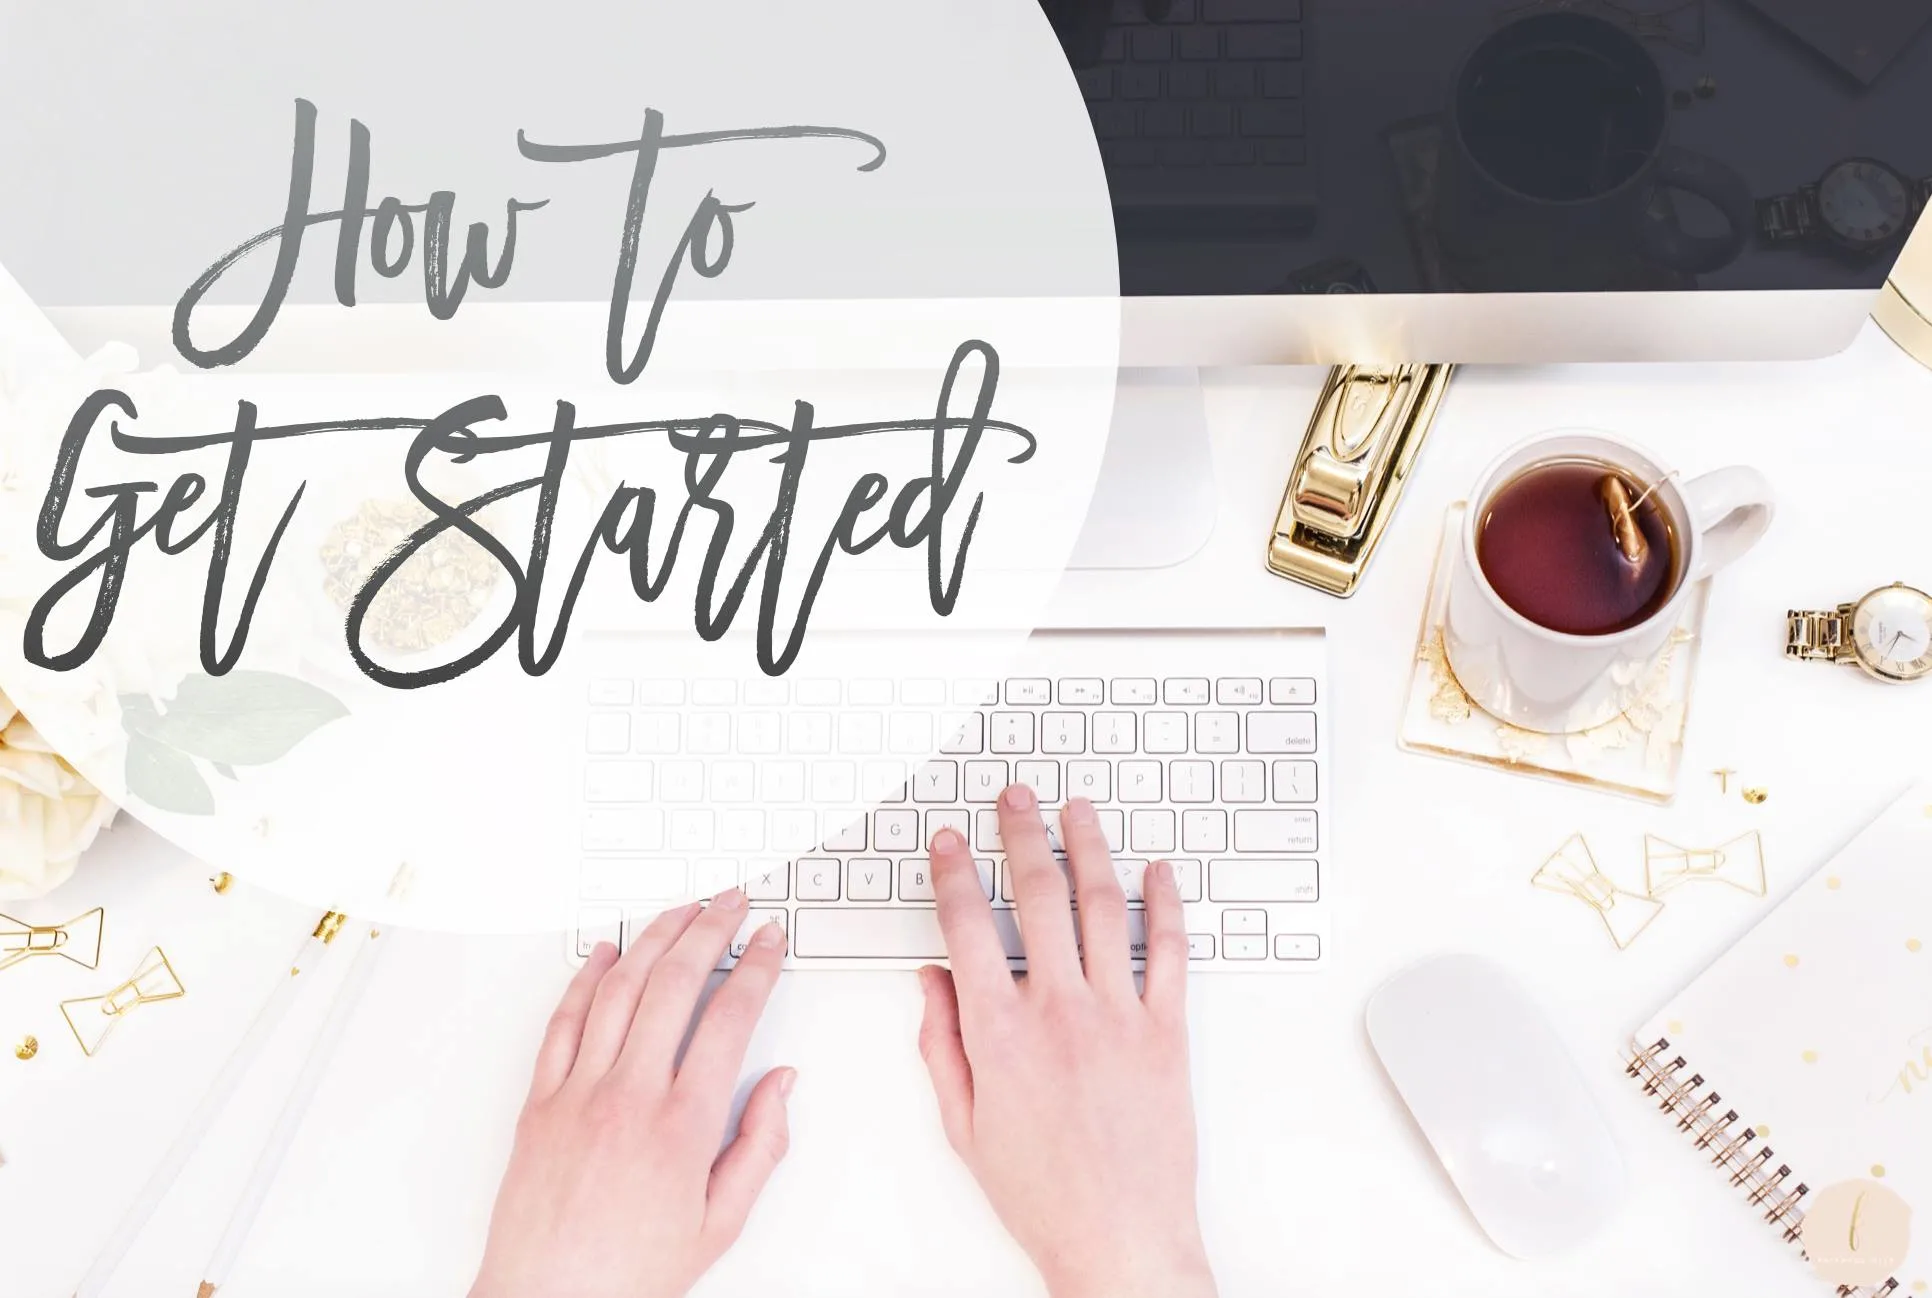 how to get started